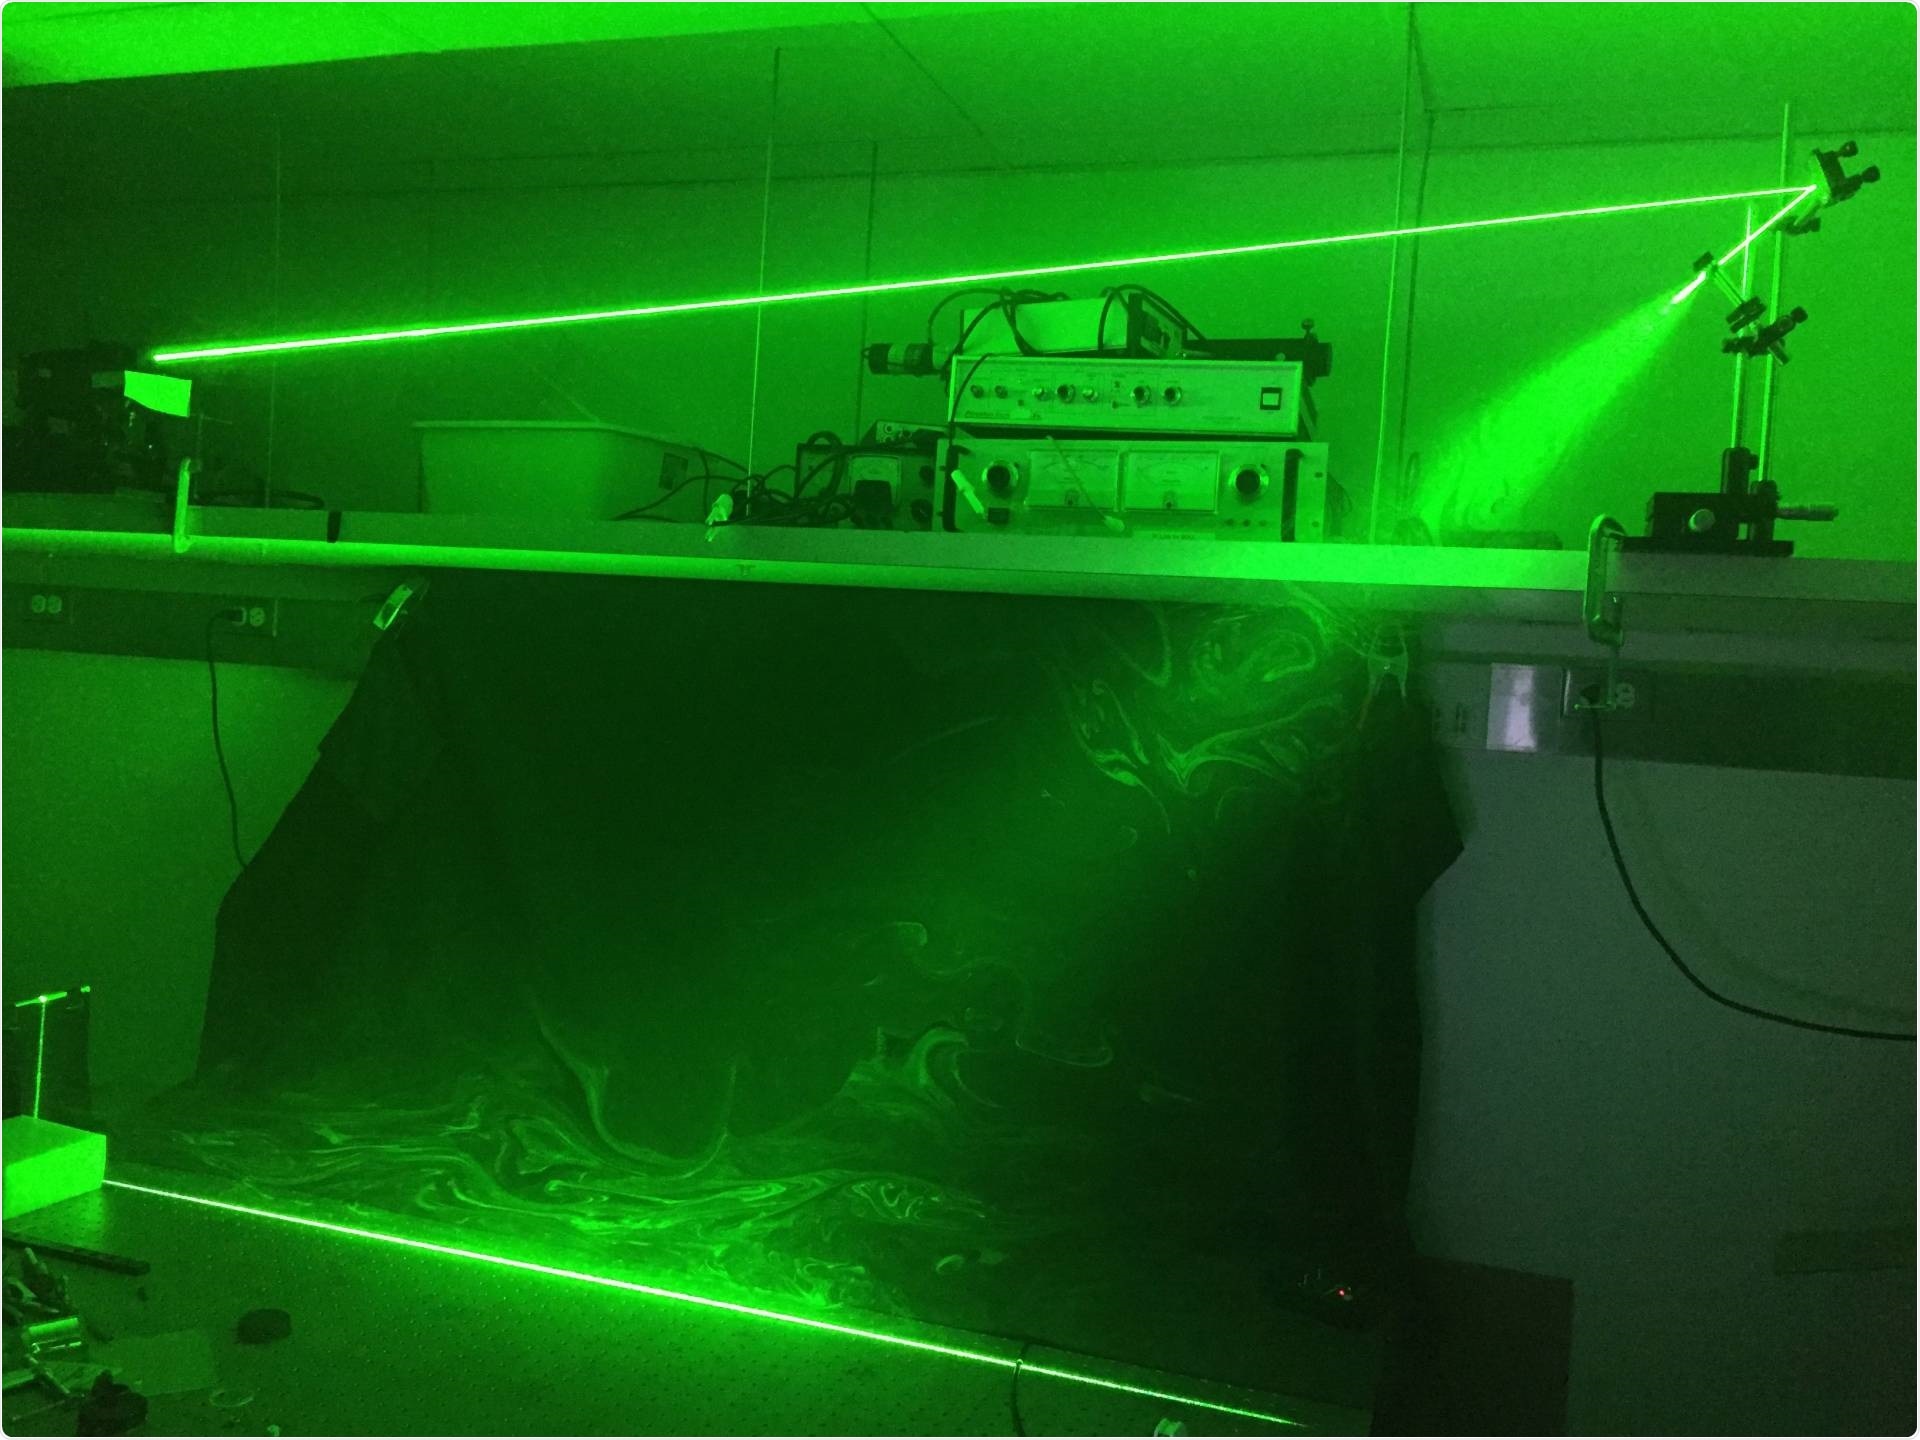 The researchers used this laser sheet to illuminate the saliva droplets. The laser light, originating at the left, is expanded to form a “sheet” going from left to right and about a meter high. The research subject (usually Manouk Abkarian of CNRS) would stand in front of the sheet or next to it, depending on the experiment. Drops from their speech or breath that crossed the sheet would produce flashes that they photographed and counted. Some experiments added a Halloween fog machine to see how the subject’s breath or speech droplets interact with the movement of ambient fog droplets.  Photo by Manouk Abkaria